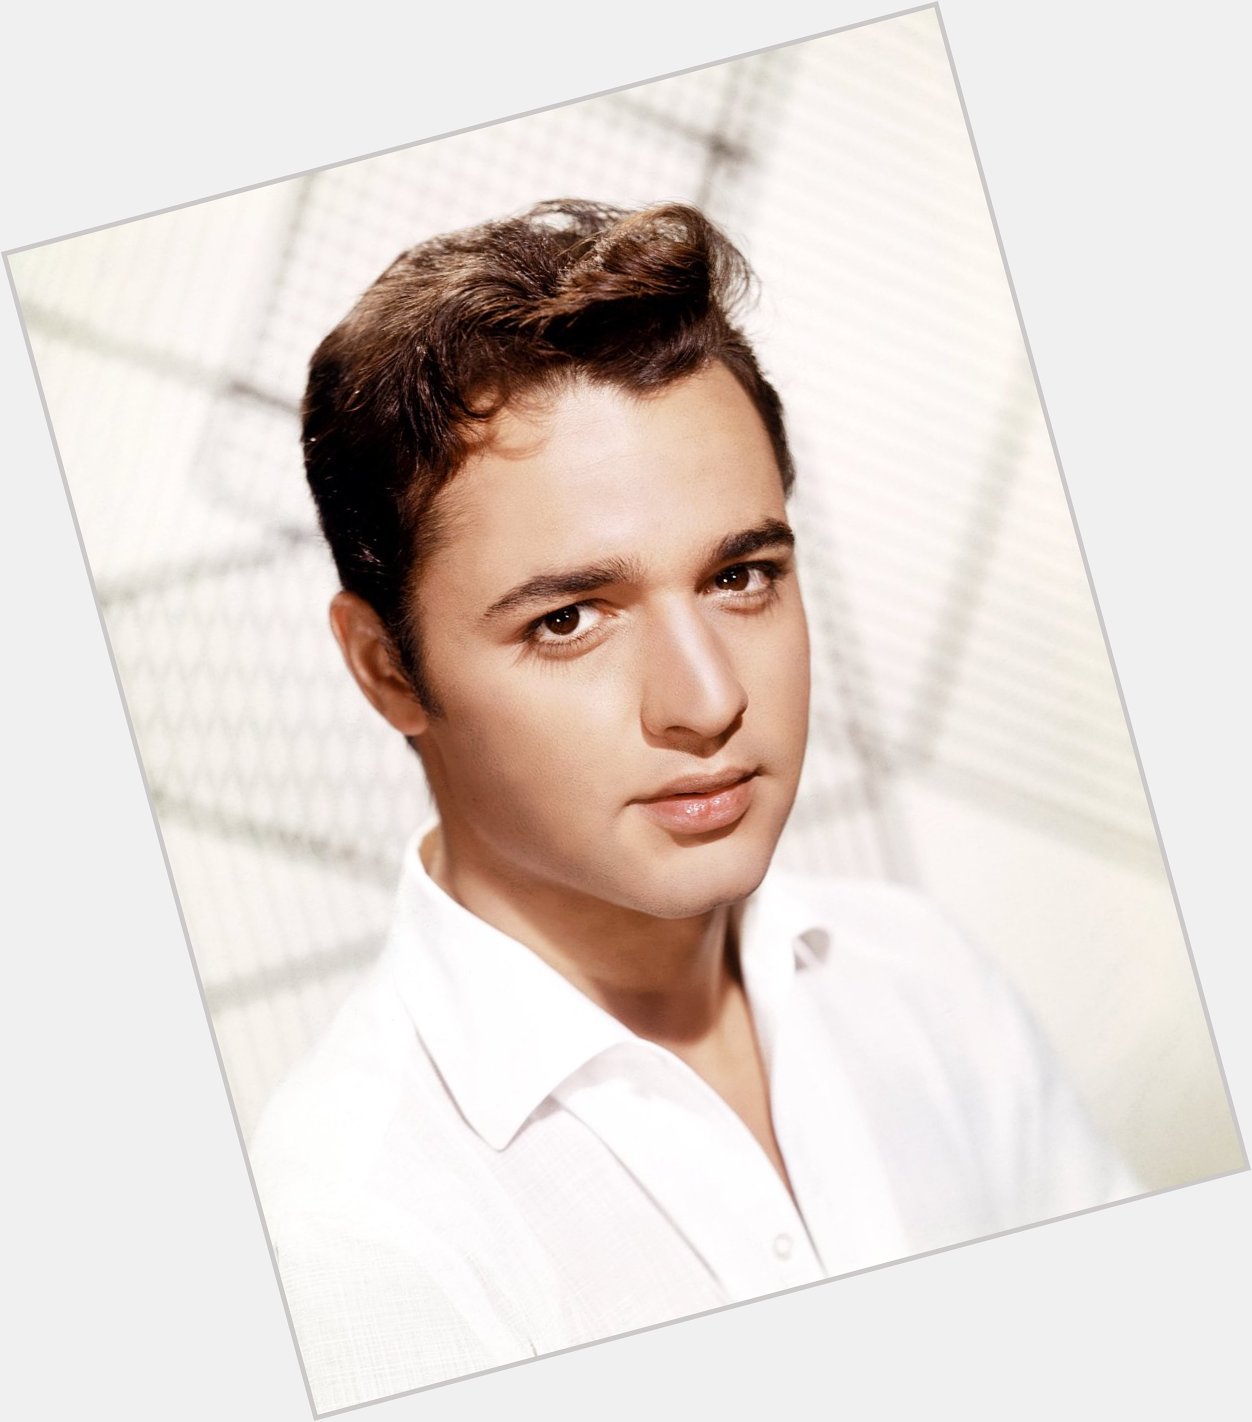 Happy birthday to this fantastic teen idol from the 1950s Sal Mineo! 